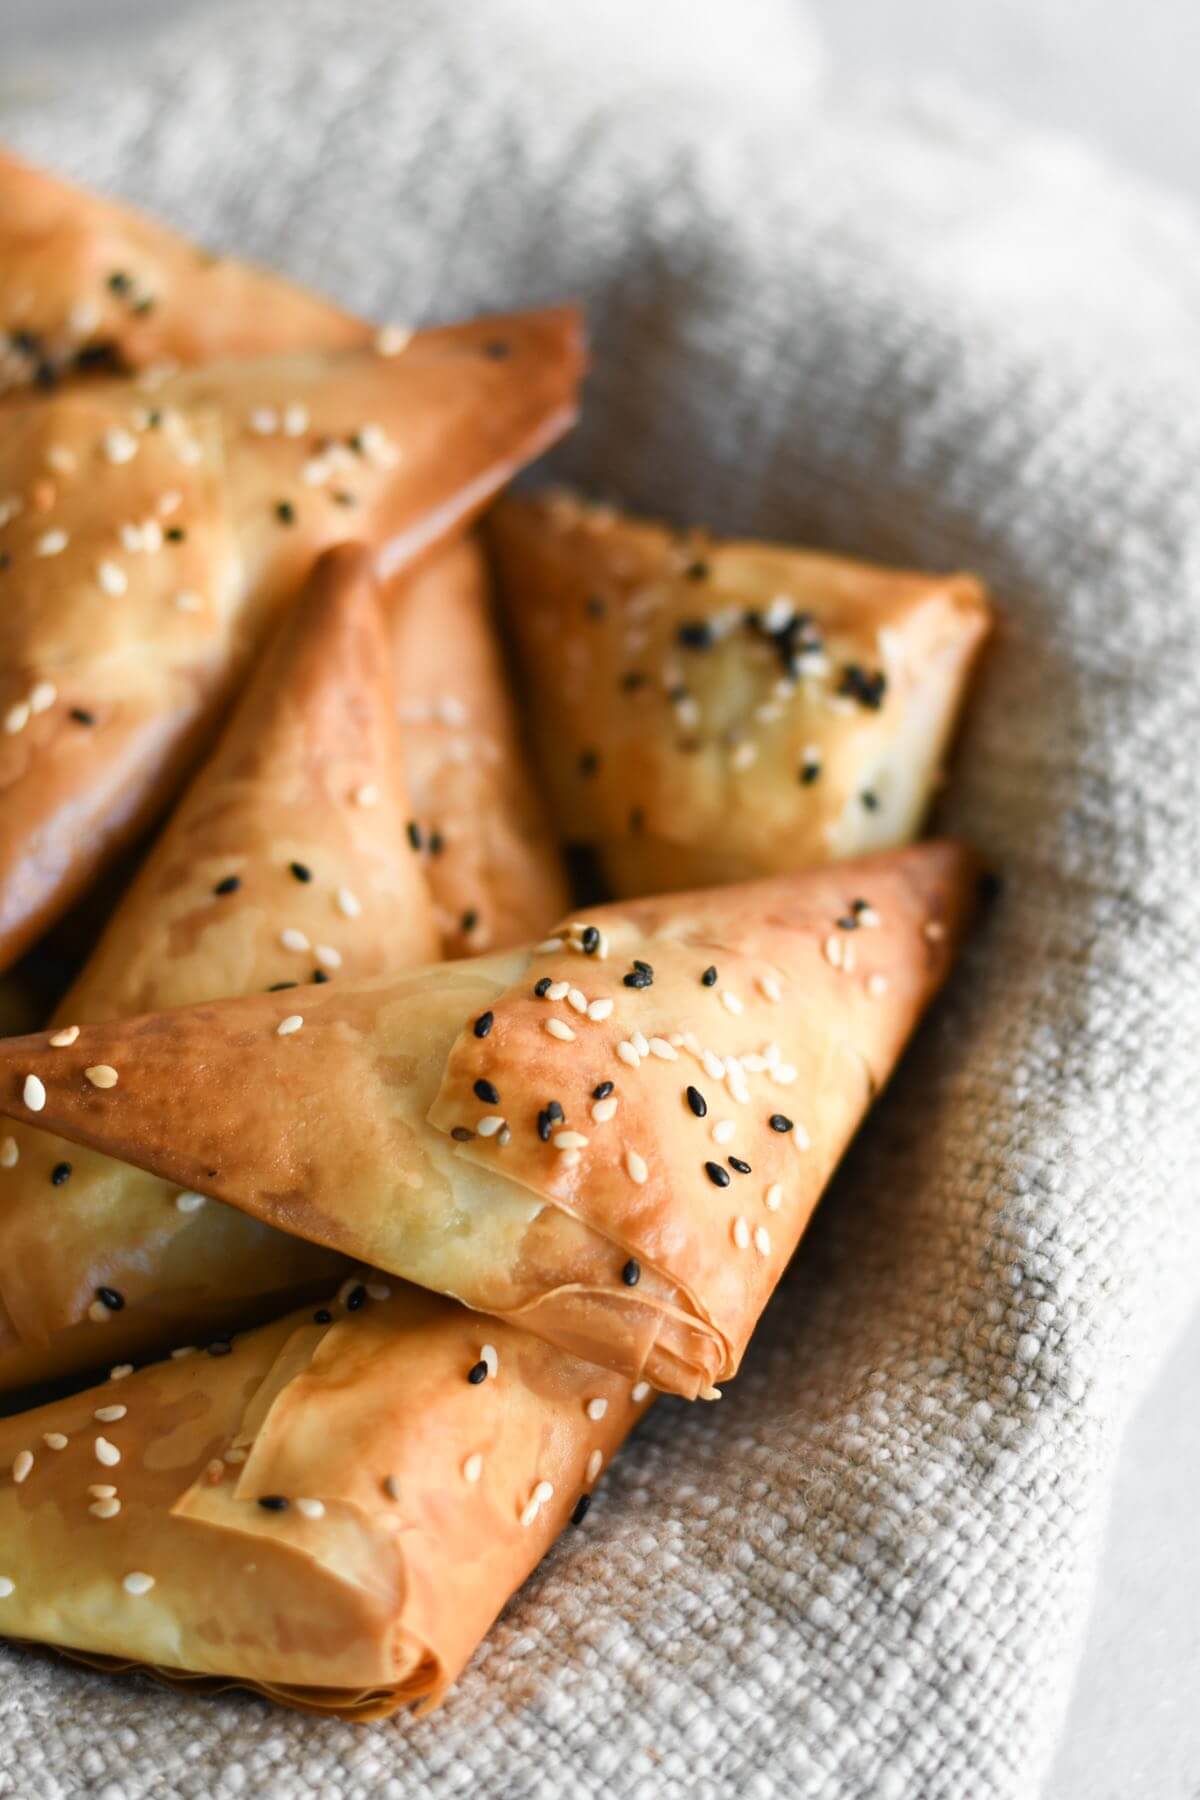 spanakopita triangles with black and white sesame seeds in a bowl.